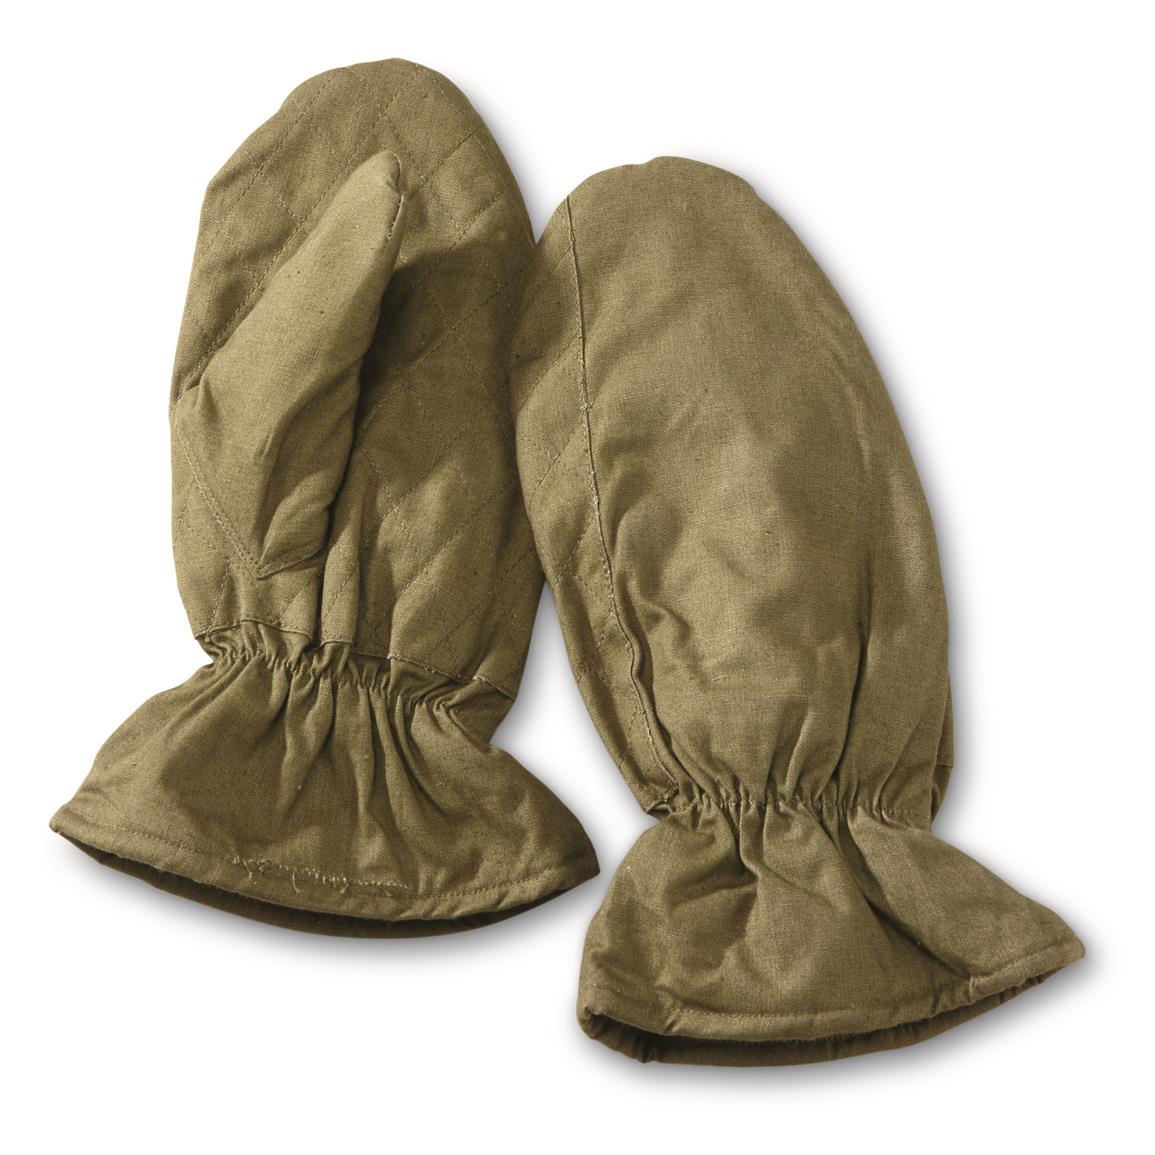 Romanian Military Surplus Fleece Lined Mittens, 2 Pack, New, Olive Drab